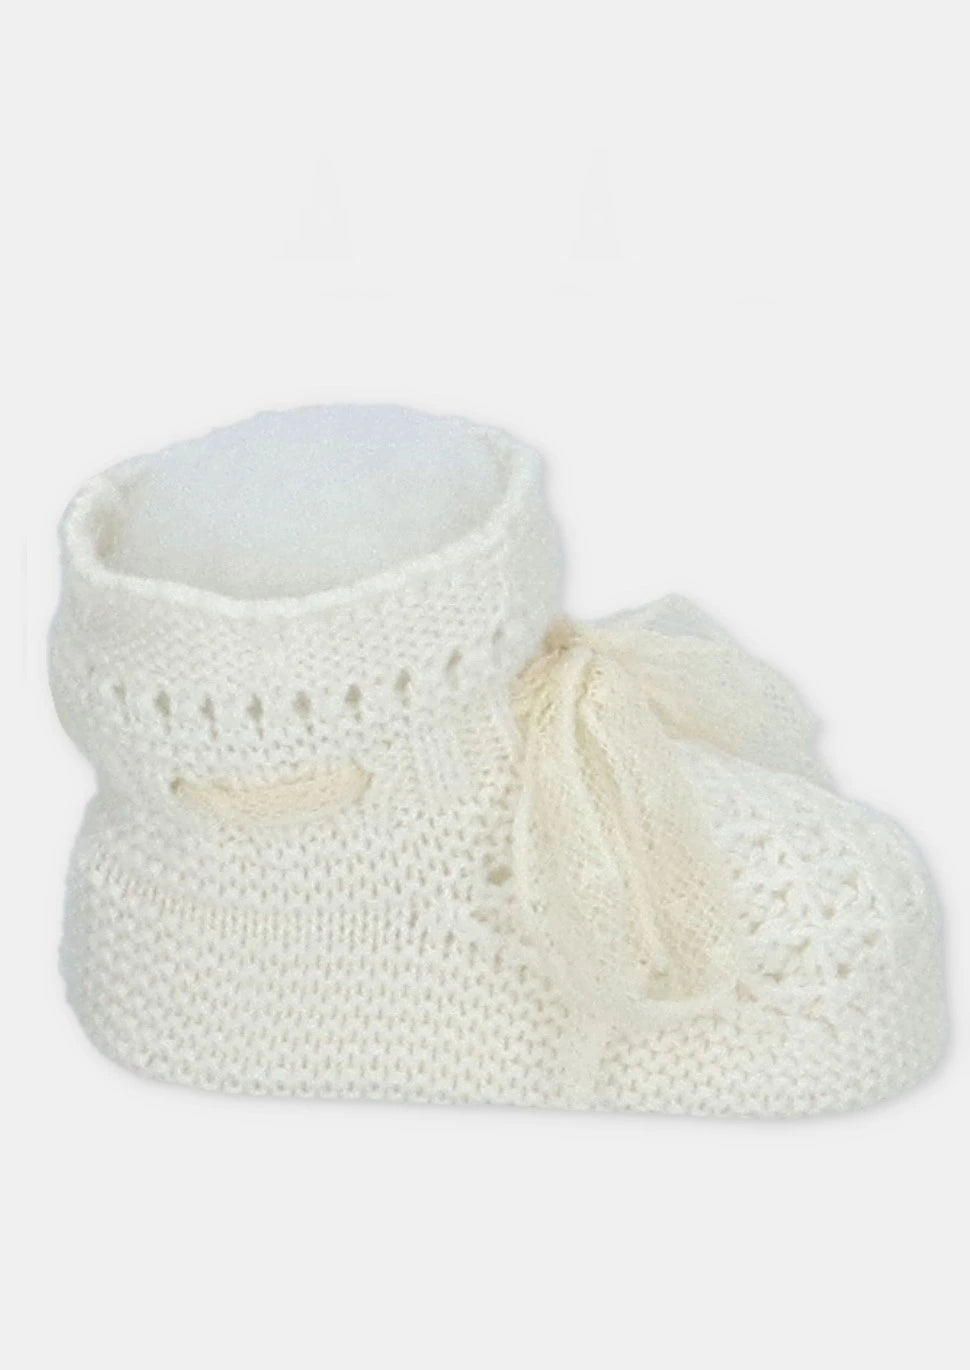 lace knitted booties by martin aranda from tors childrens wear